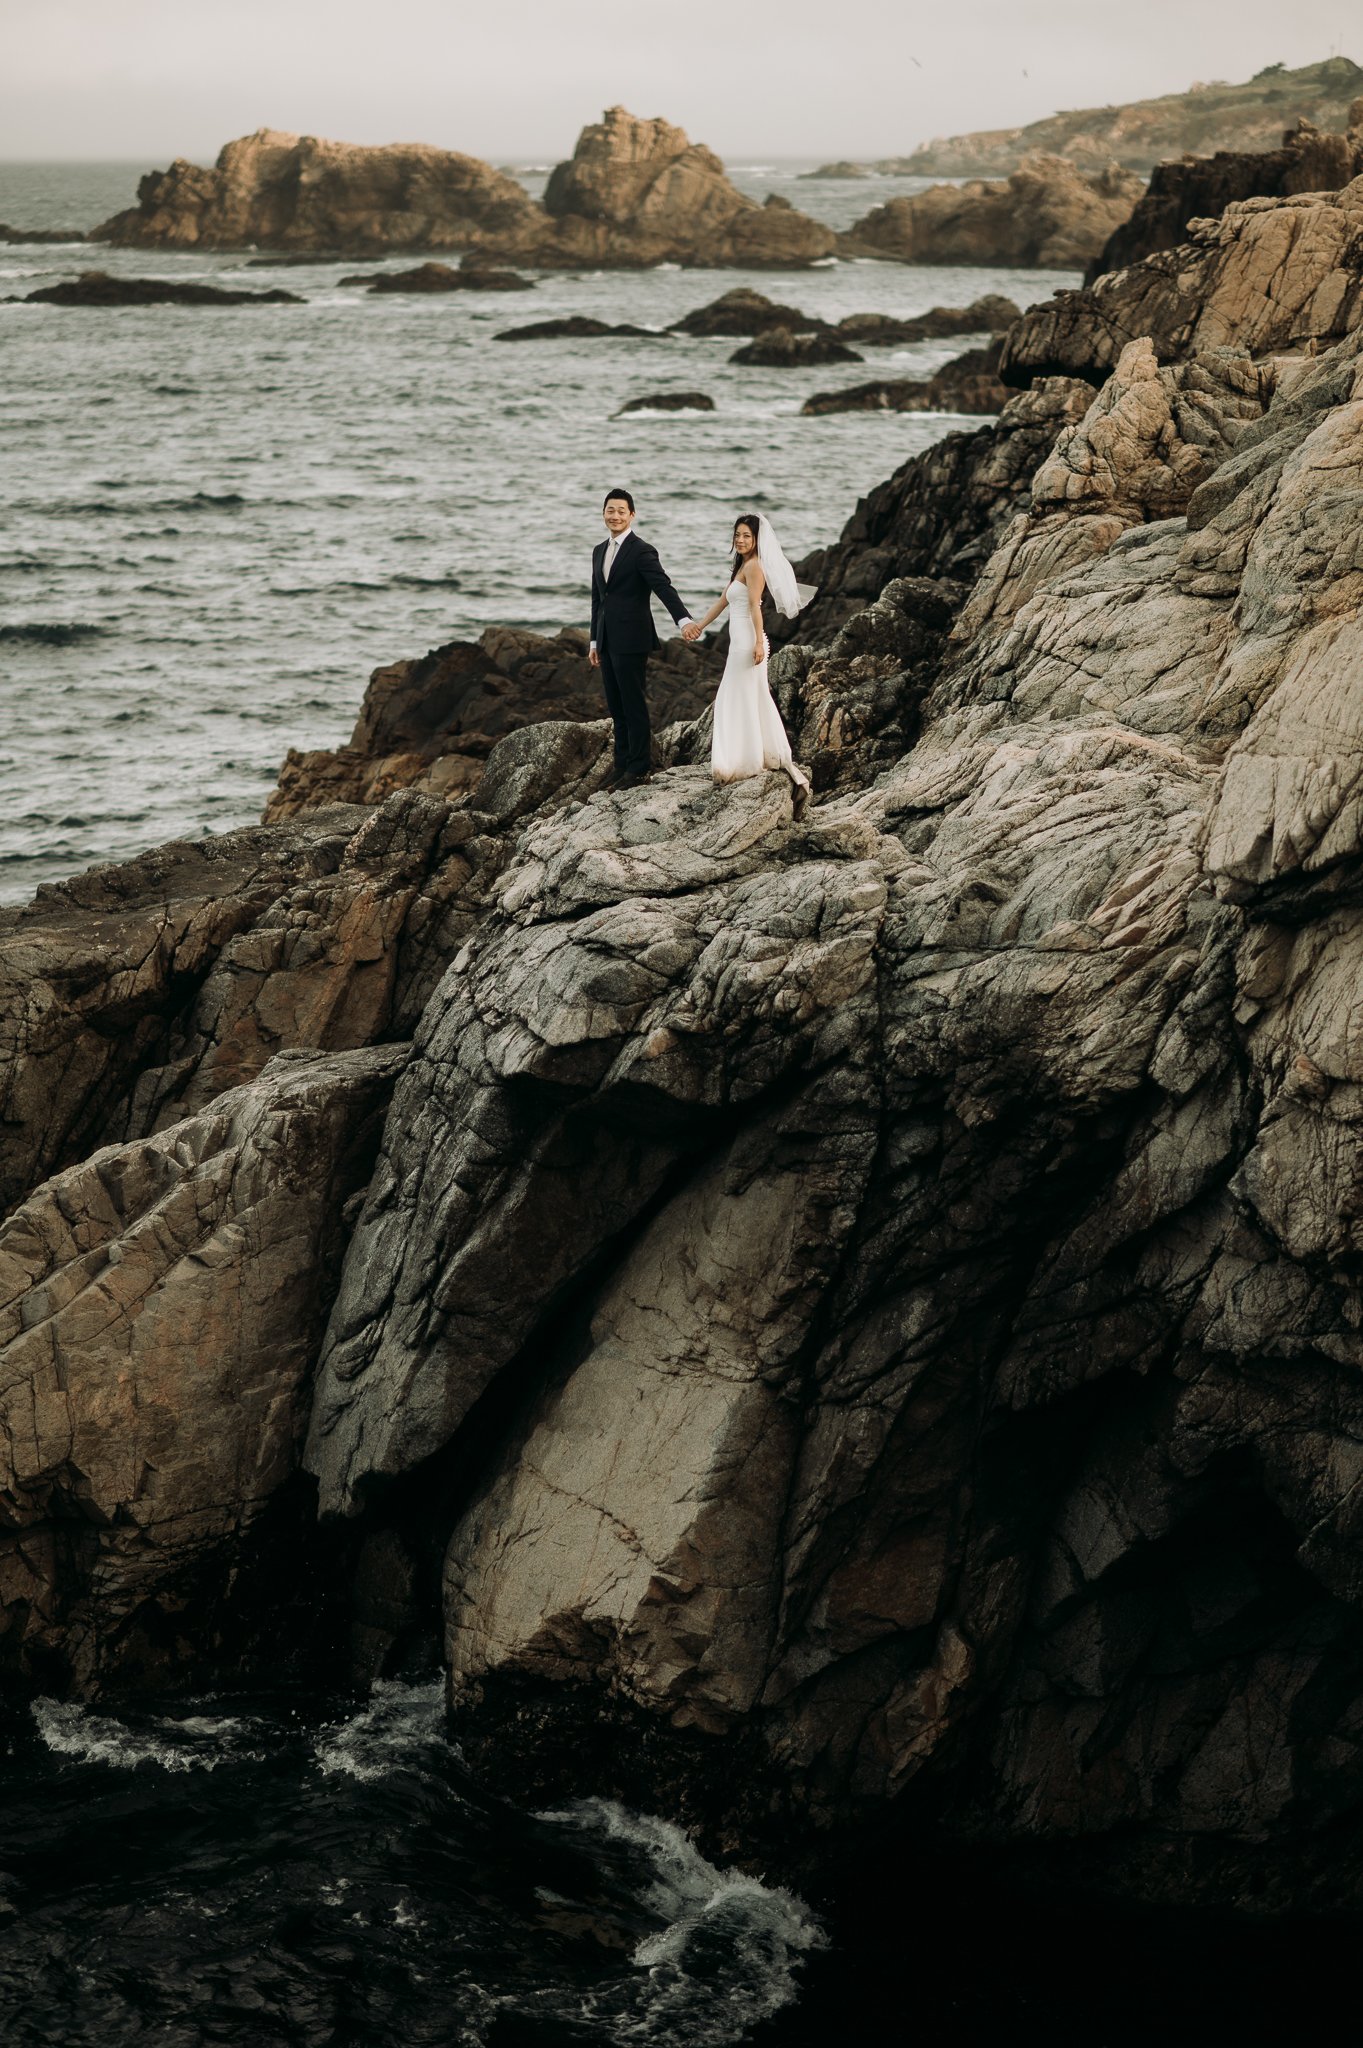 Bride and groom posing for photo on cliff with Pacific Ocean in background